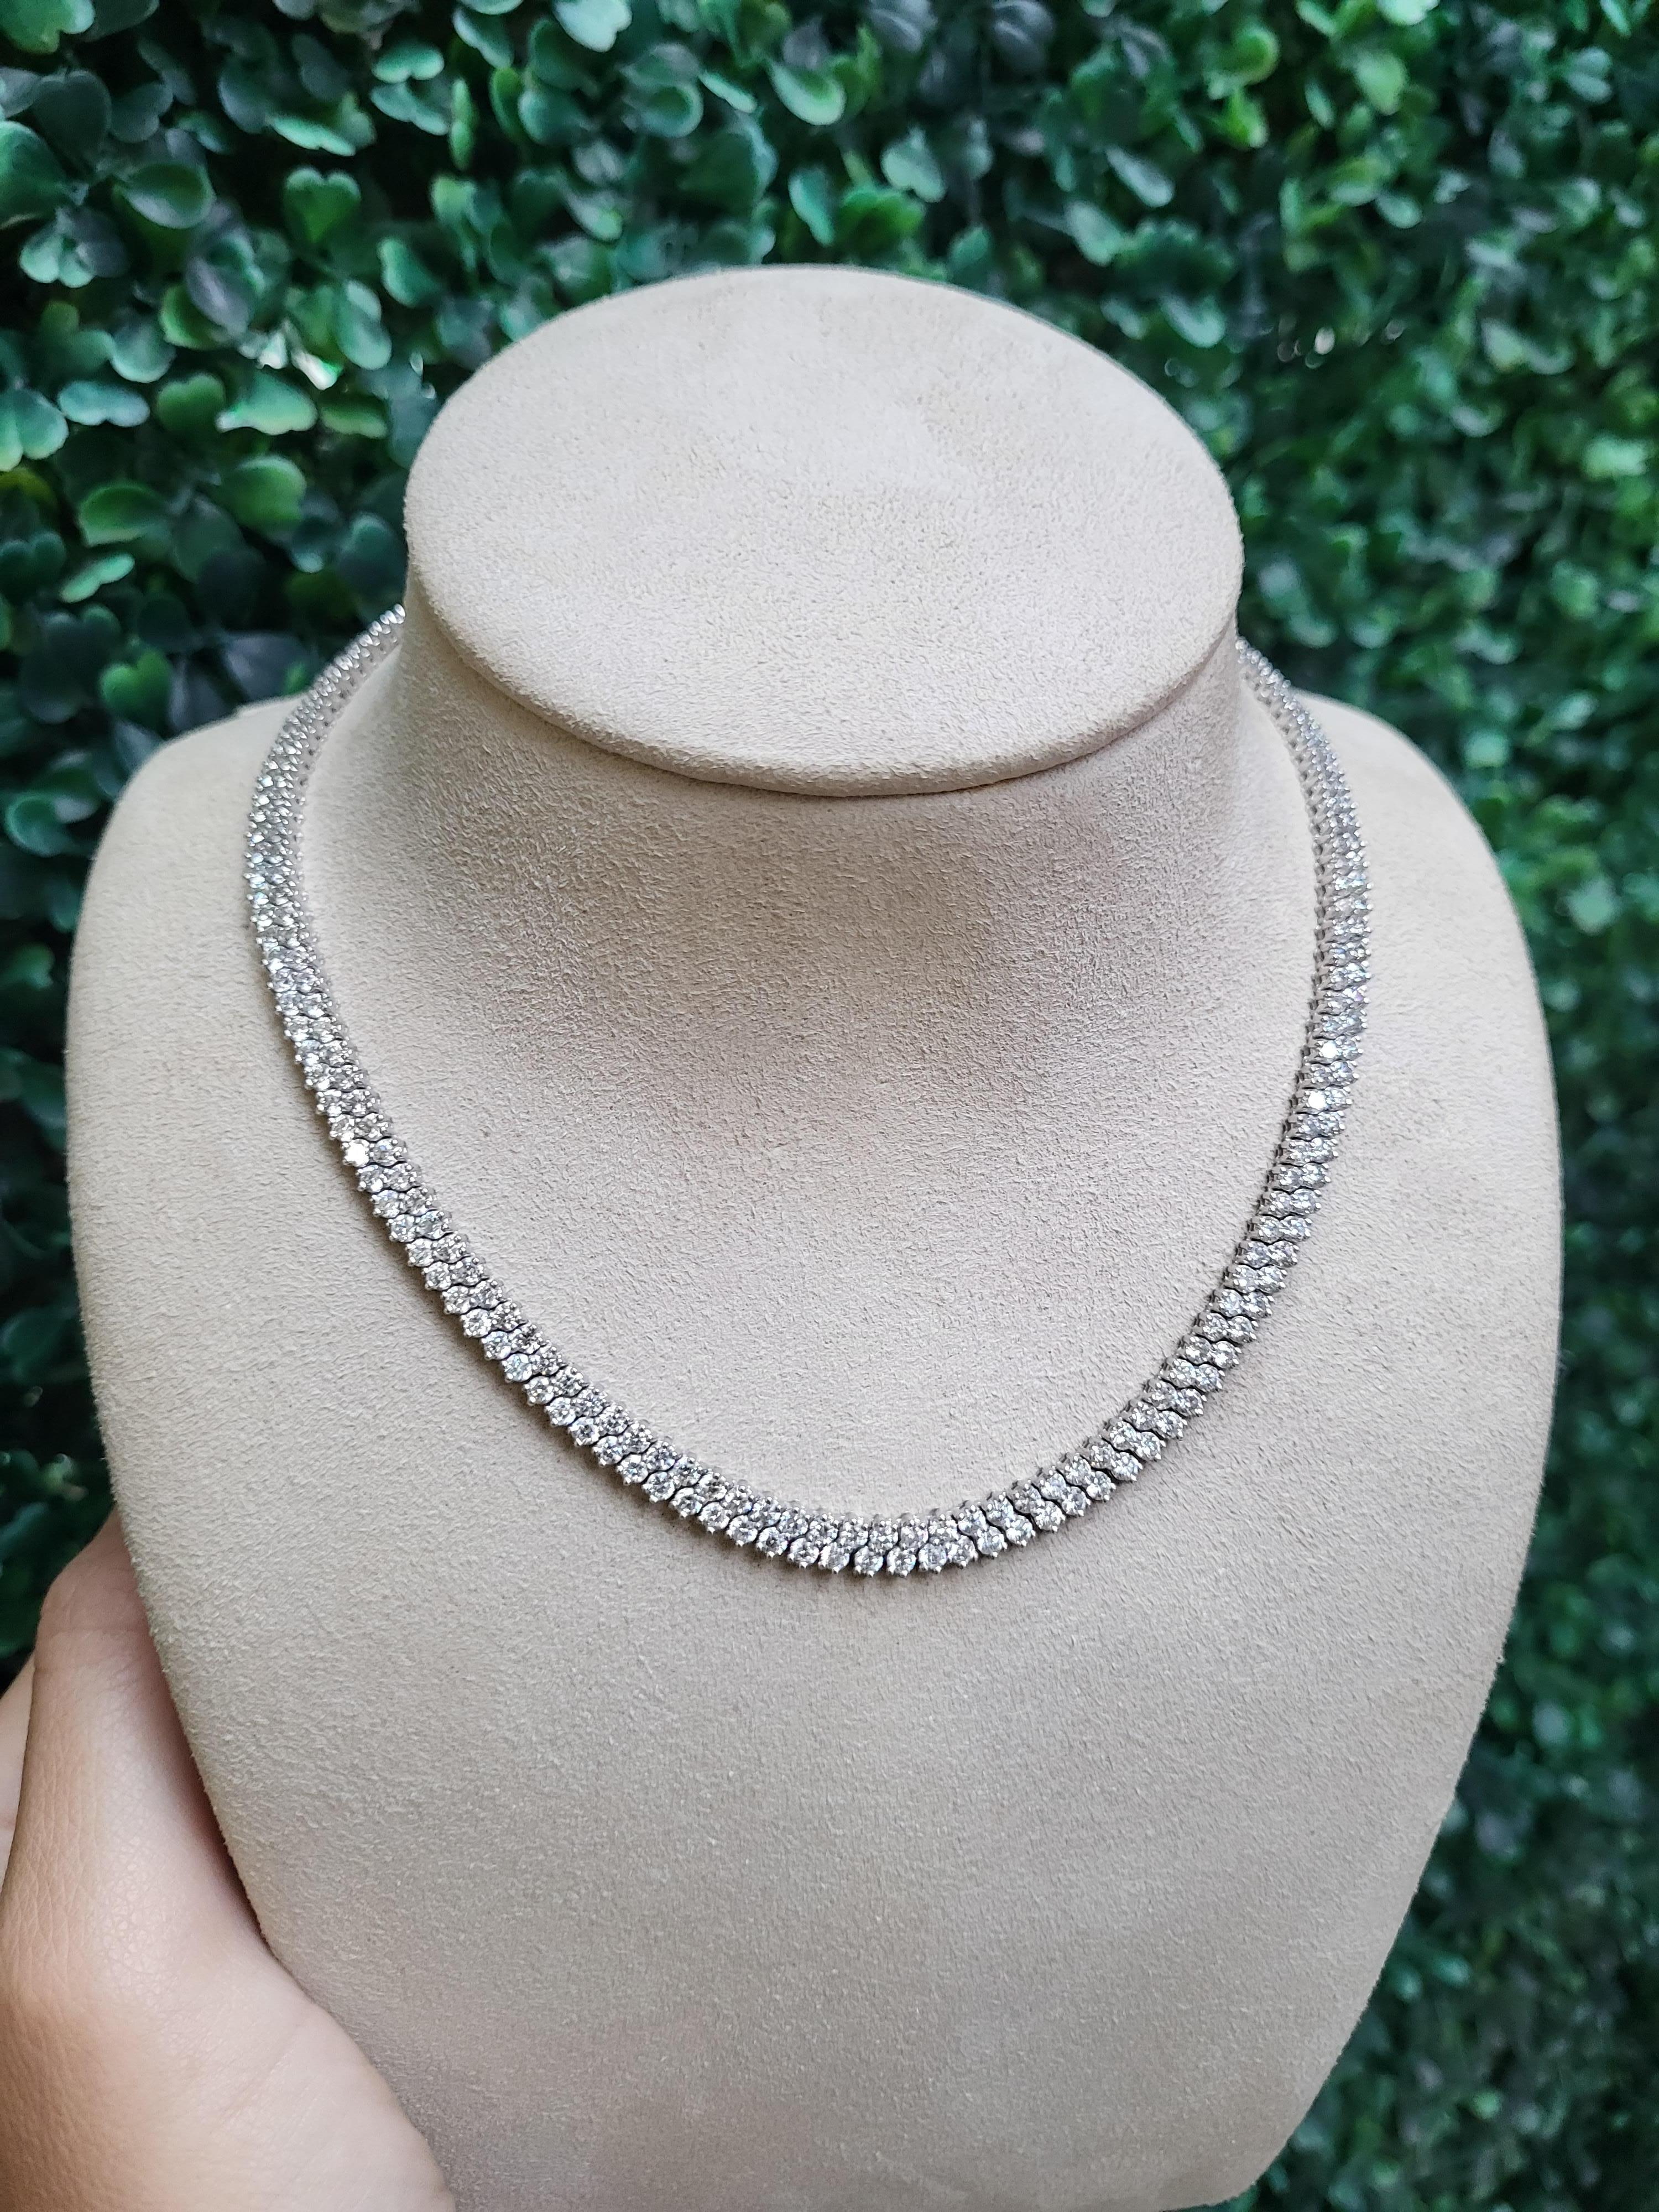 14 Karat White Gold 10.13 Carat Total Weight Diamond Two Row Choker Necklace For Sale 3